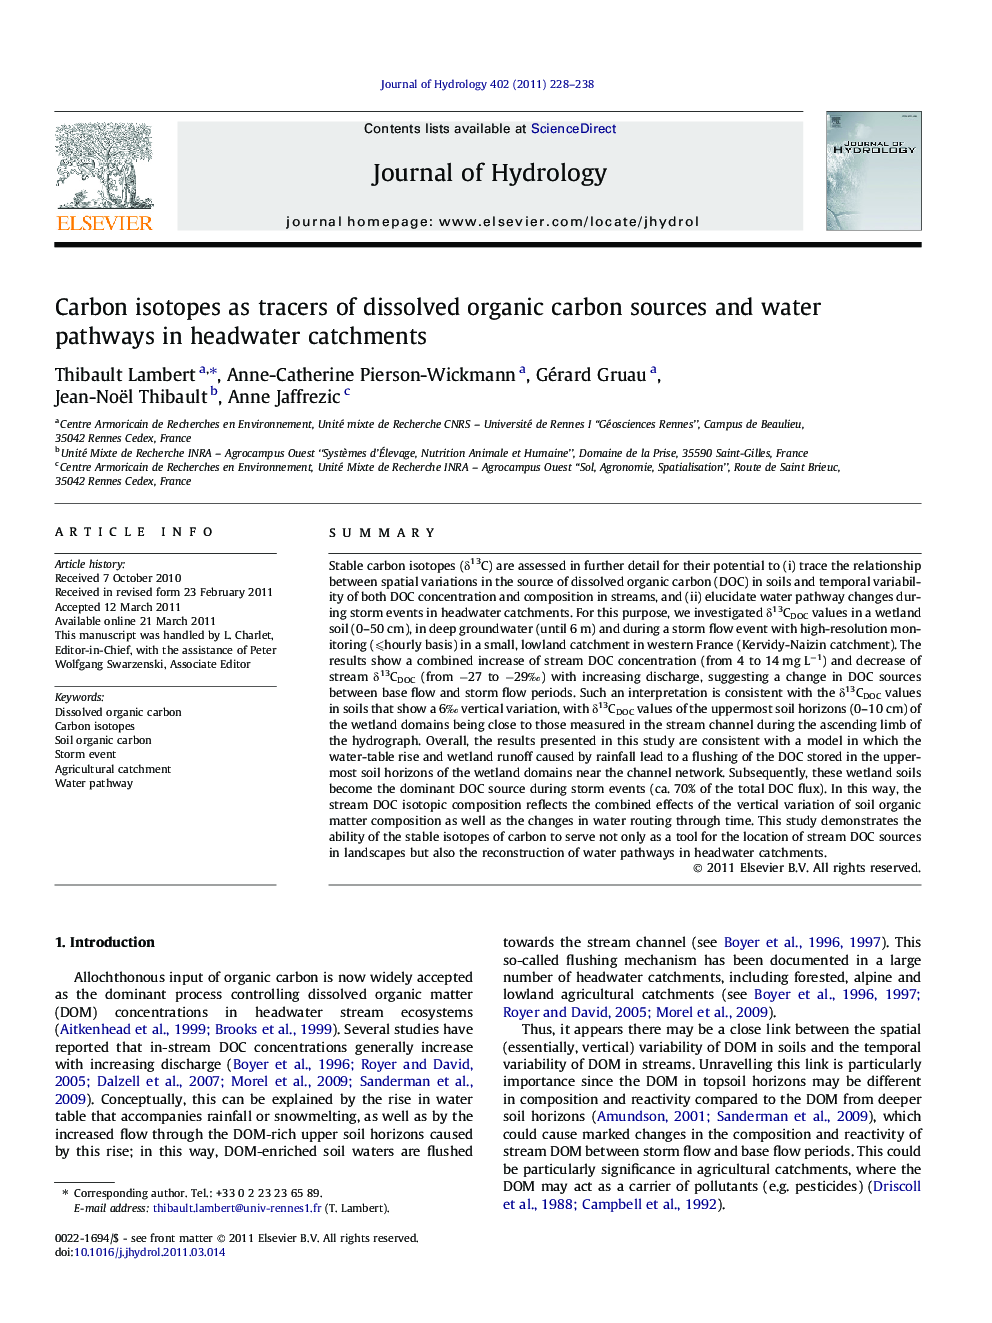 Carbon isotopes as tracers of dissolved organic carbon sources and water pathways in headwater catchments